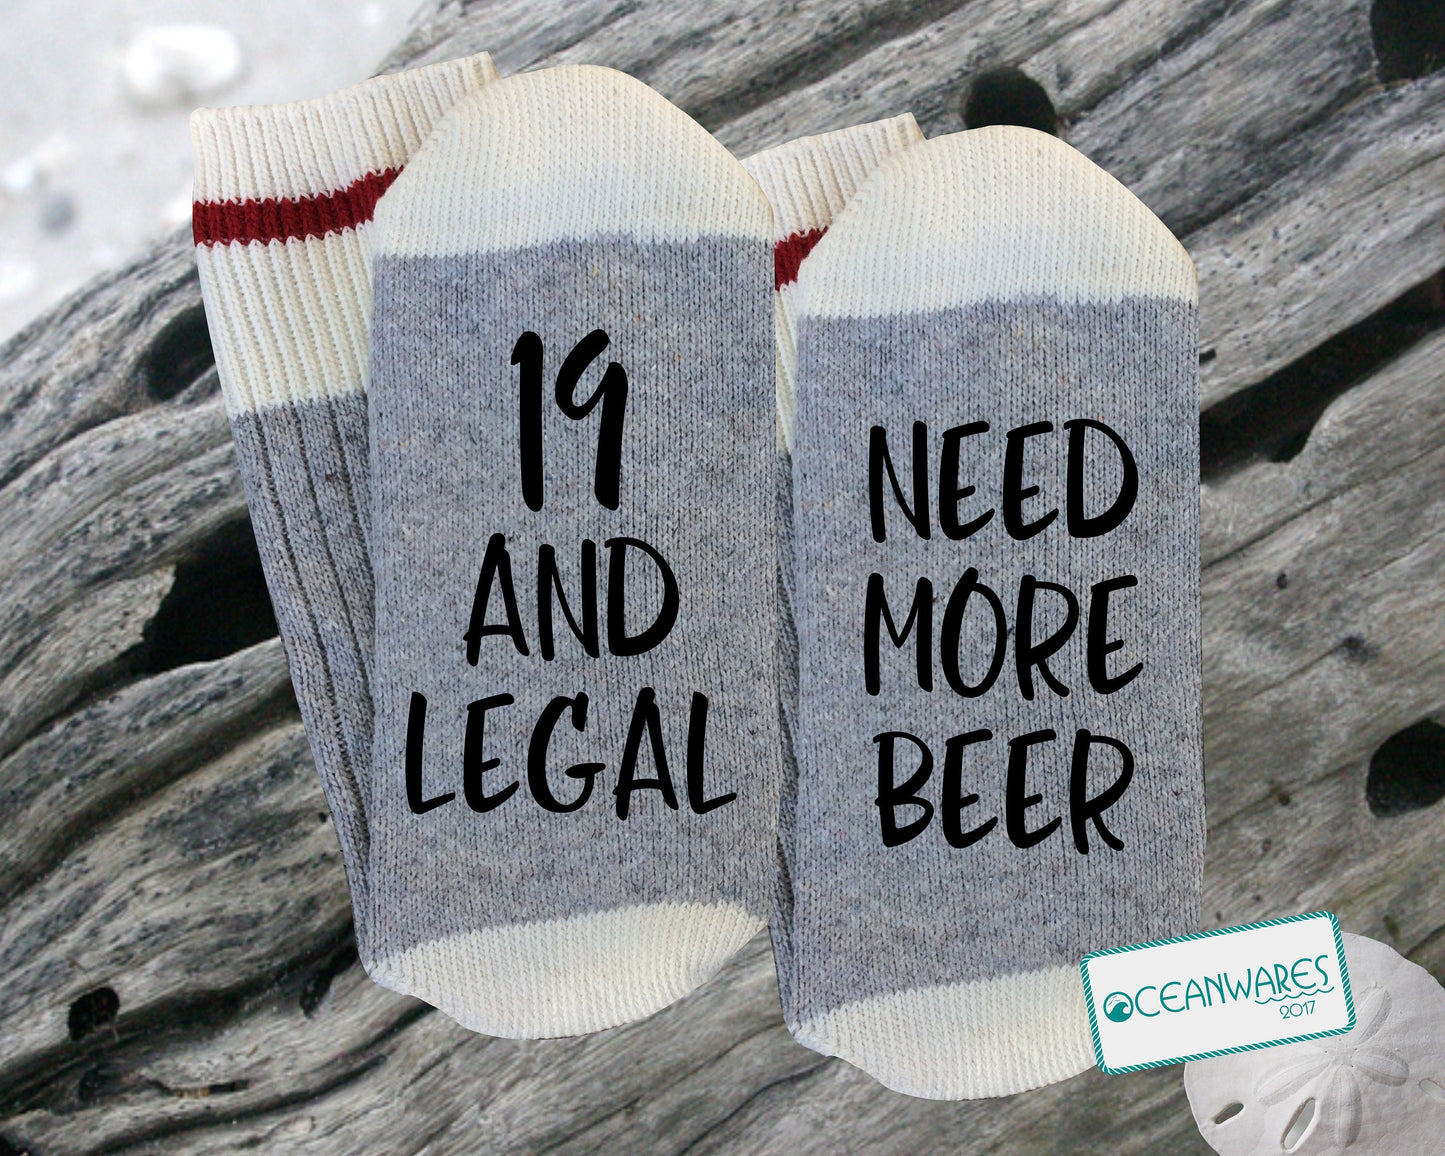 19 and Legal, Need more beer, SUPER SOFT NOVELTY WORD SOCKS.